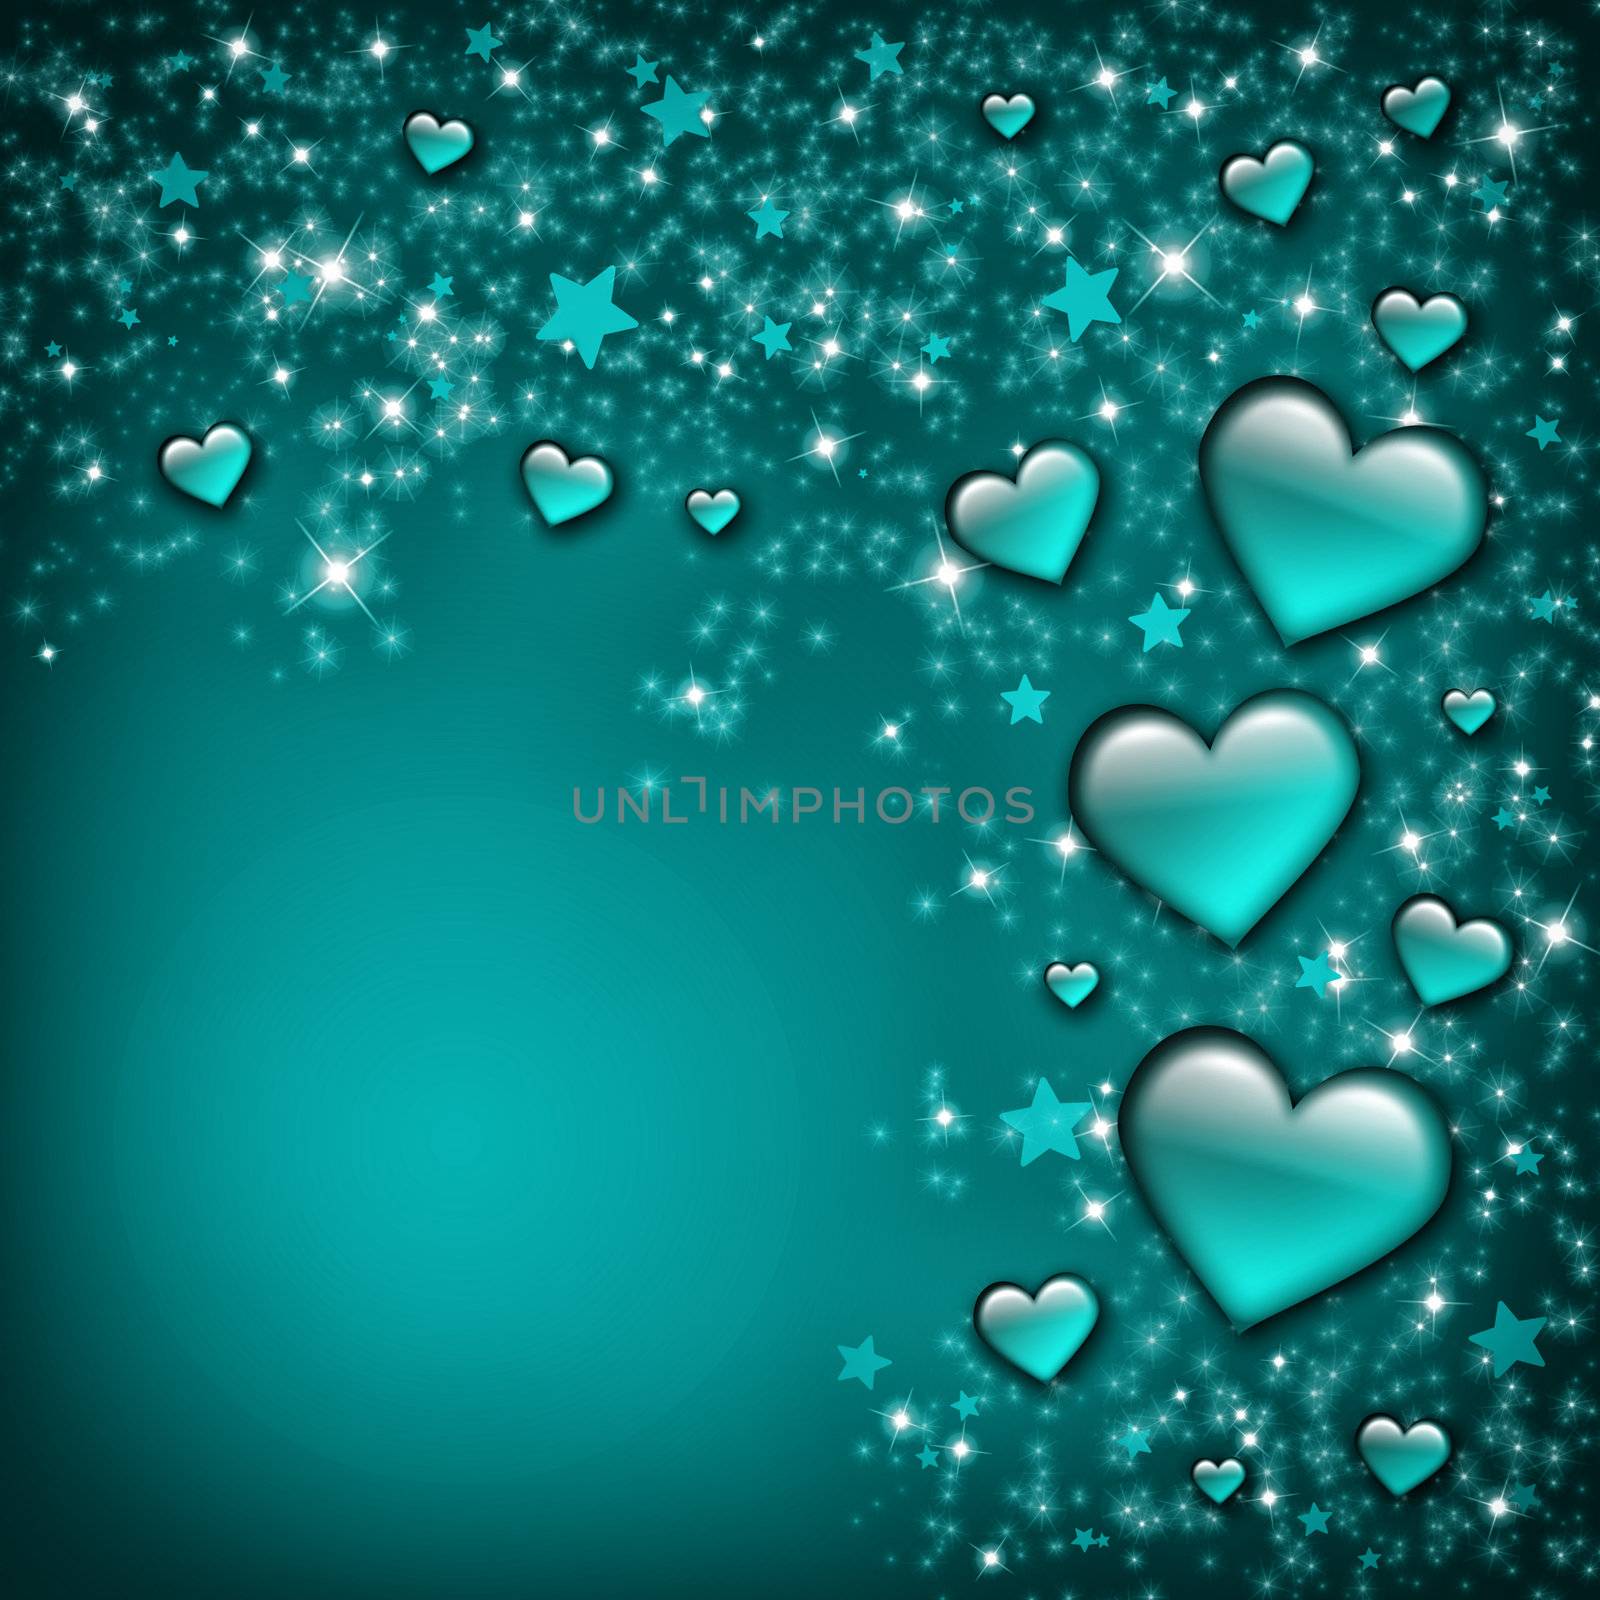 Valentines Day Card with turquoise Hearts and stars